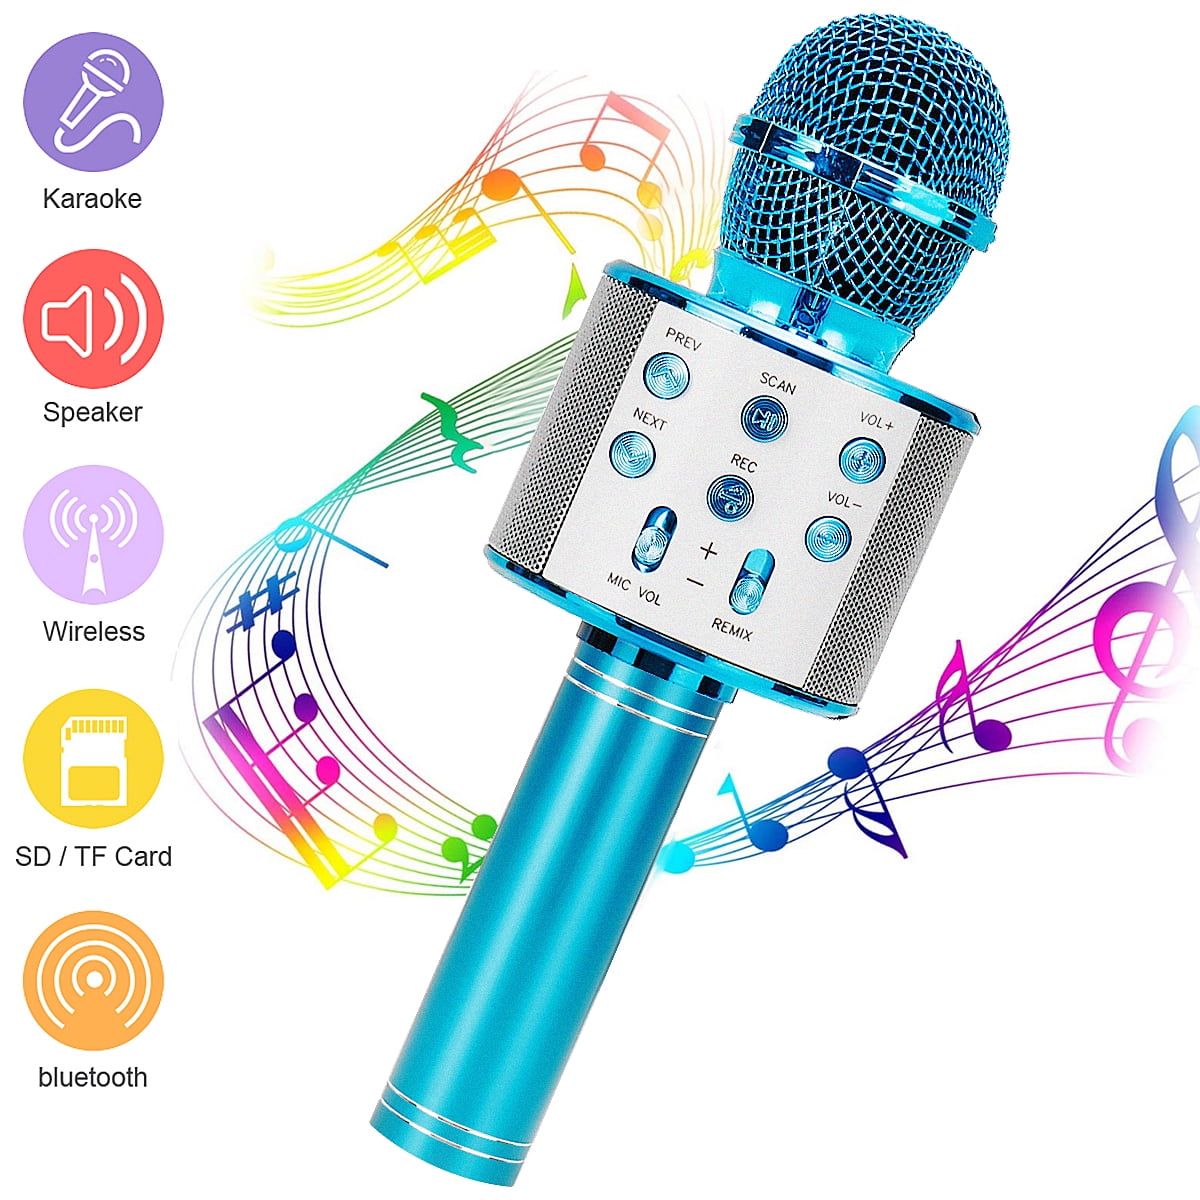 Karaoke Bluetooth Microphone with Speaker Magic Voices, Record Function, Handheld Wireless Microphone for Kids Party KTV Gifts